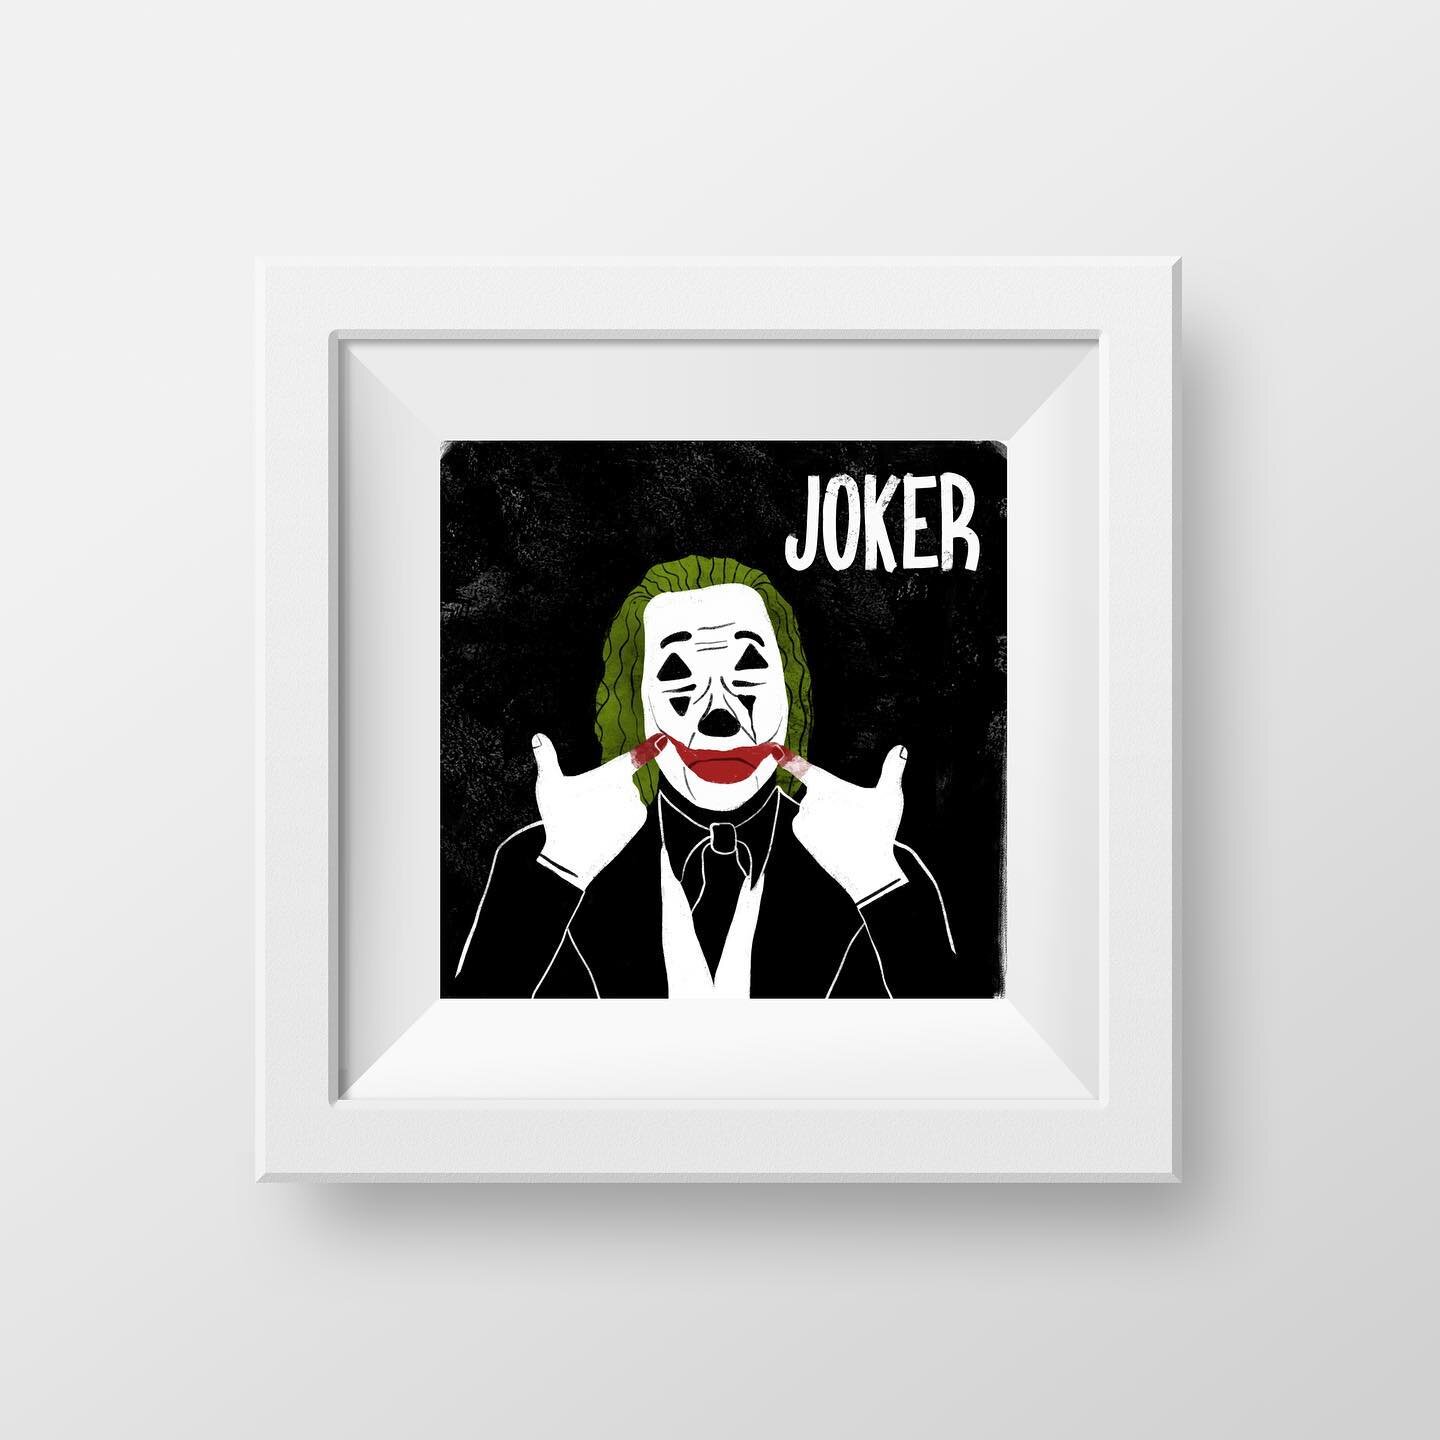 🎬 Joker (2019 ~ Directed by Todd Phillips)
⏳ The film follows Arthur Fleck, a failed stand-up comedian in Gotham City who will become the Joker.

As part of my #KDoesTheOscars series, I am reposting this illustration for the film Joker. It has recei